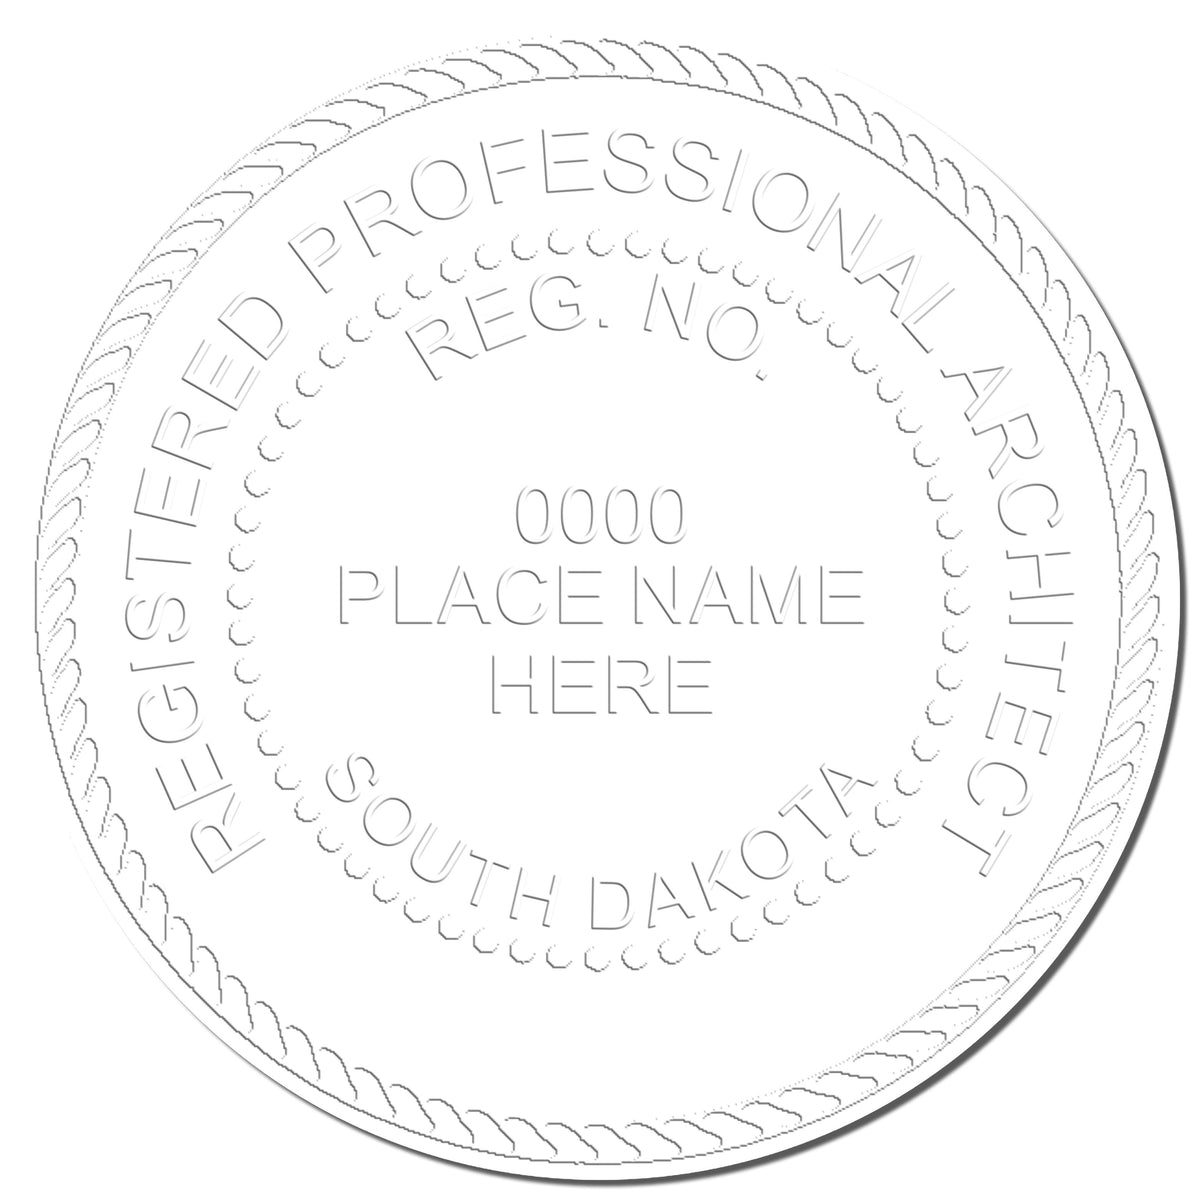 This paper is stamped with a sample imprint of the Hybrid South Dakota Architect Seal, signifying its quality and reliability.